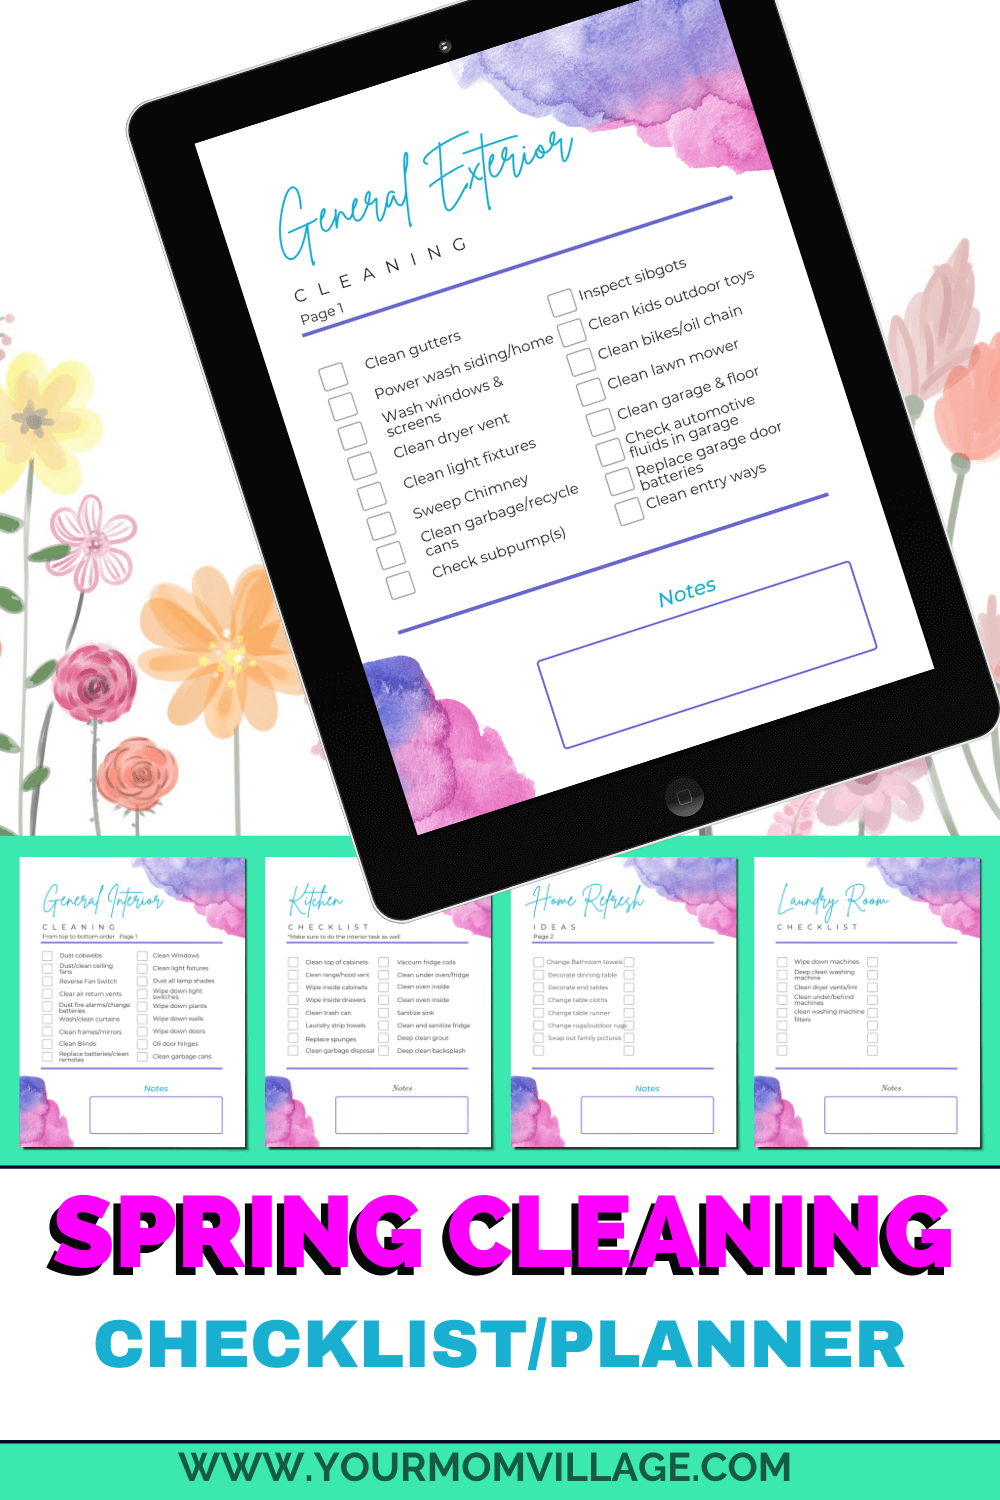 Spring Cleaning checklist, planner and bucket list